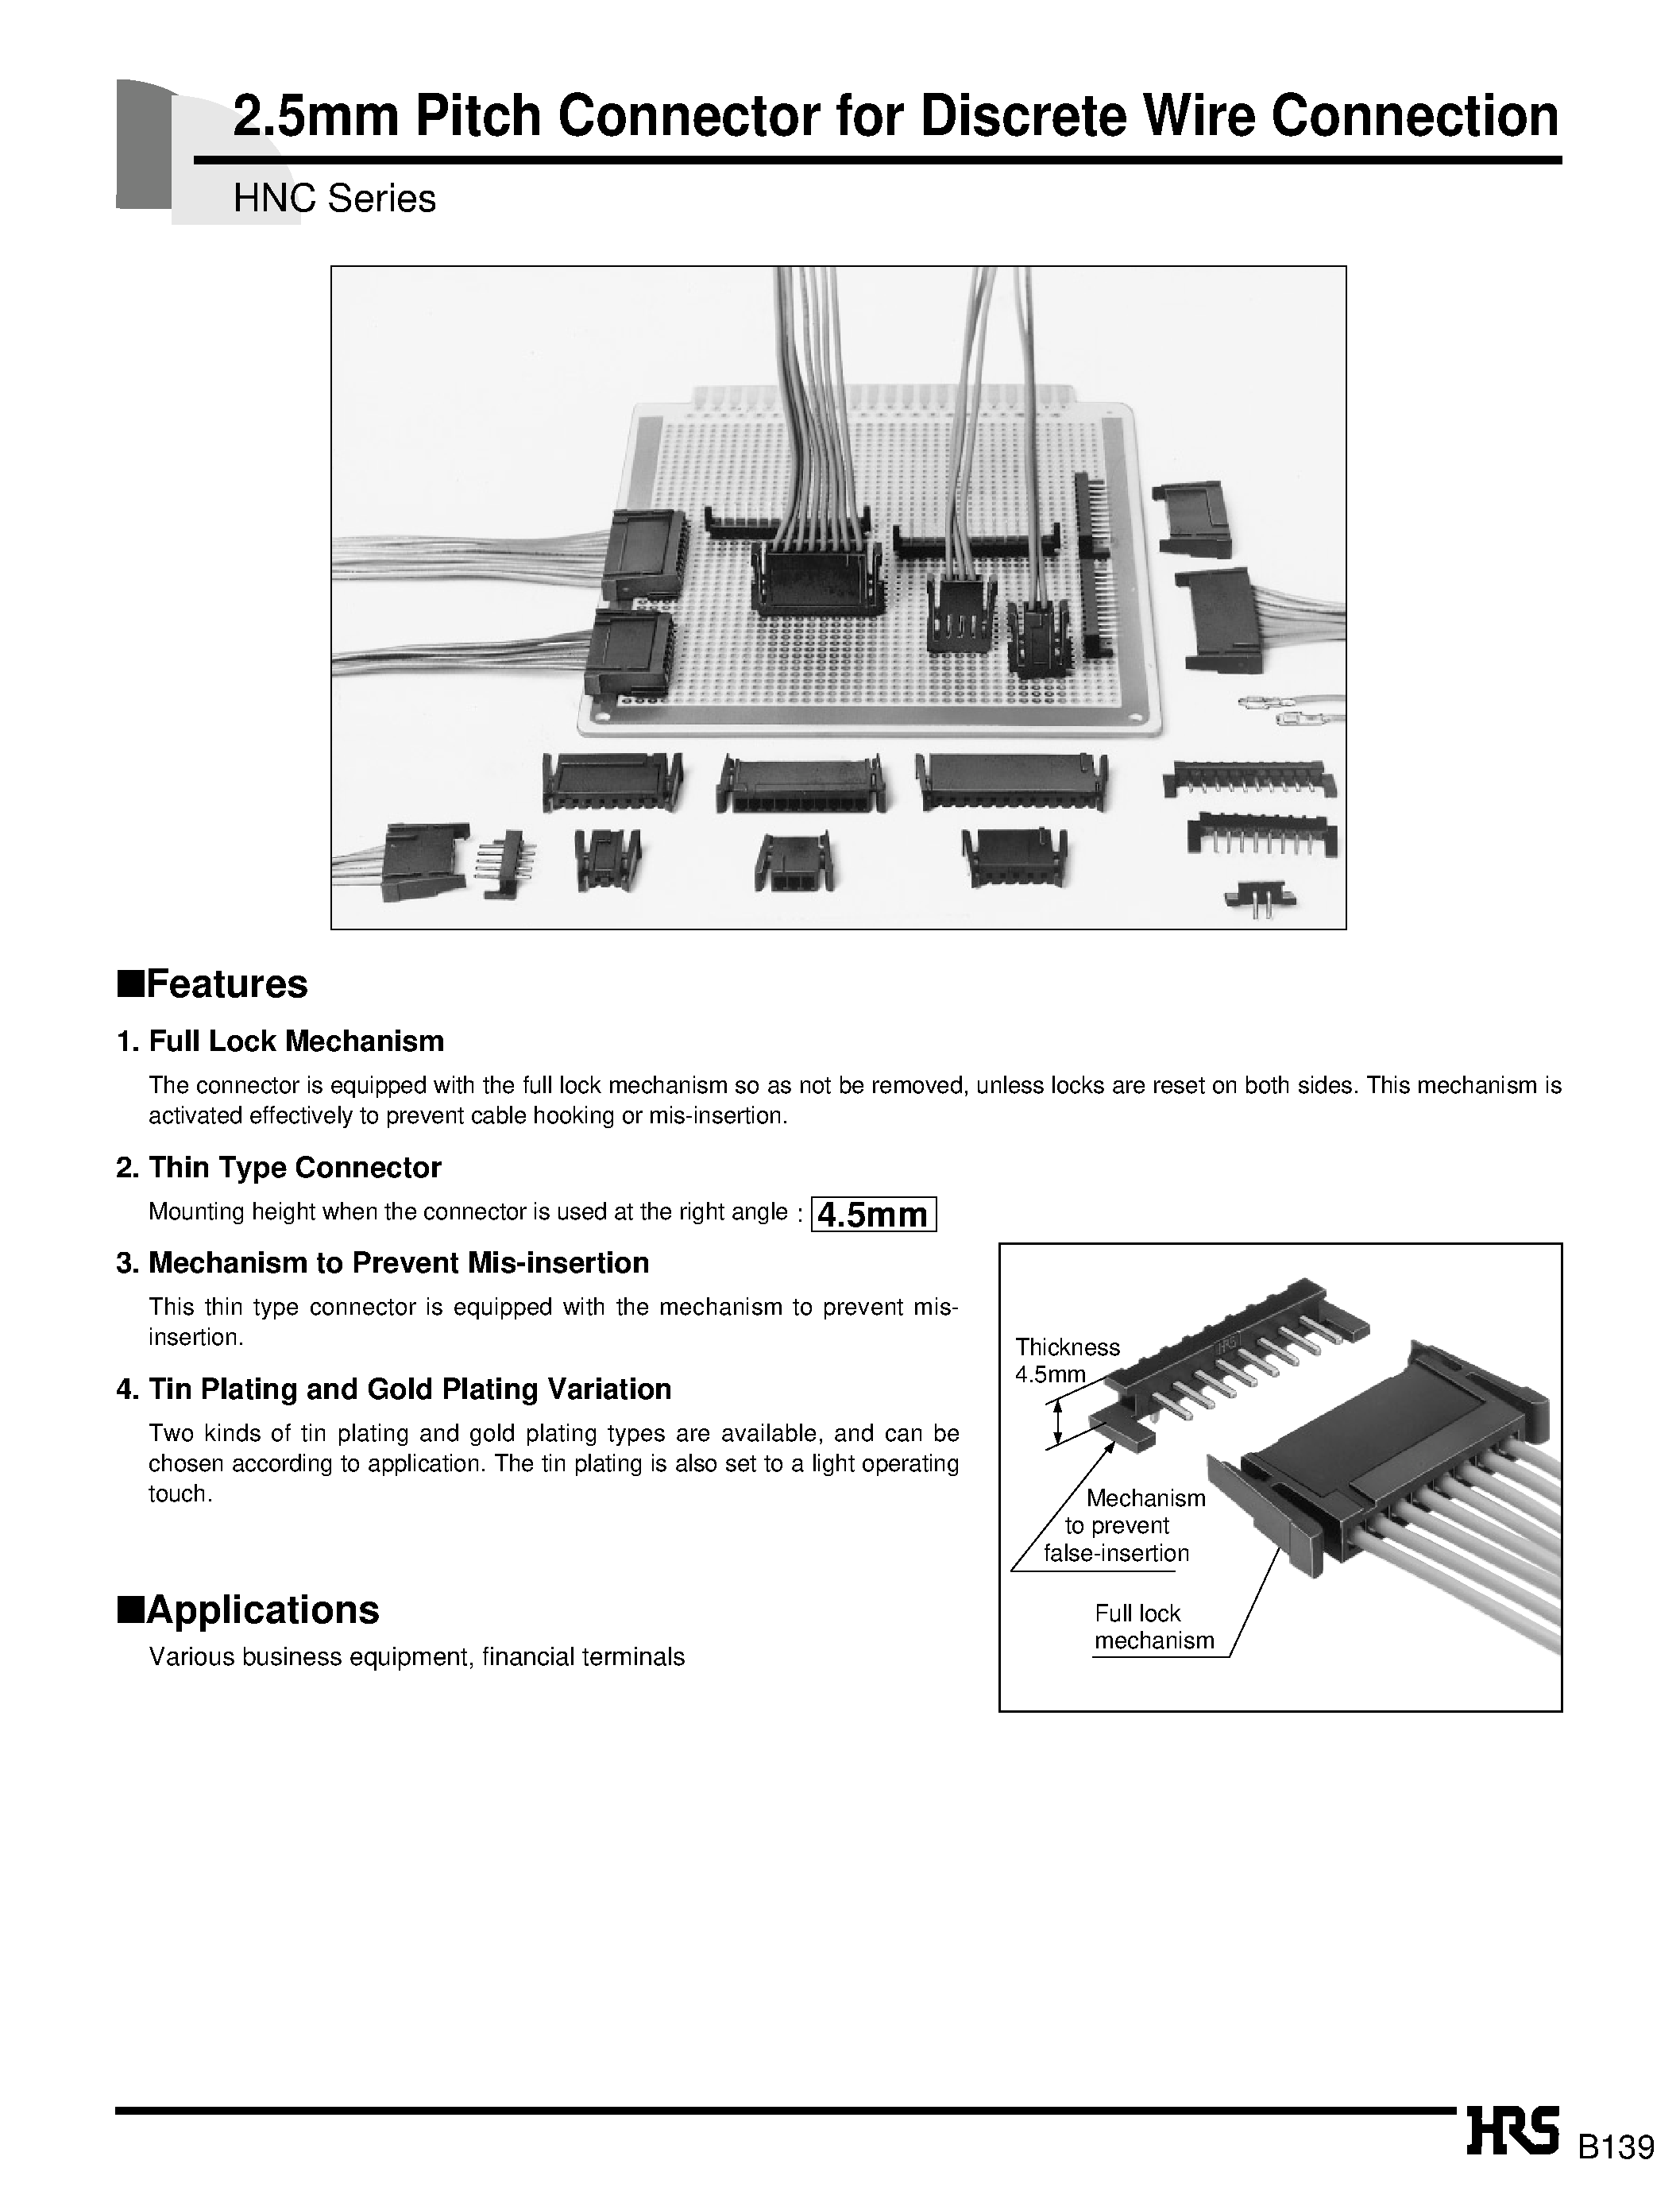 Datasheet HNC-2.5S-D-B - 2.5mm Pitch Connector for Discrete Wire Connection page 1